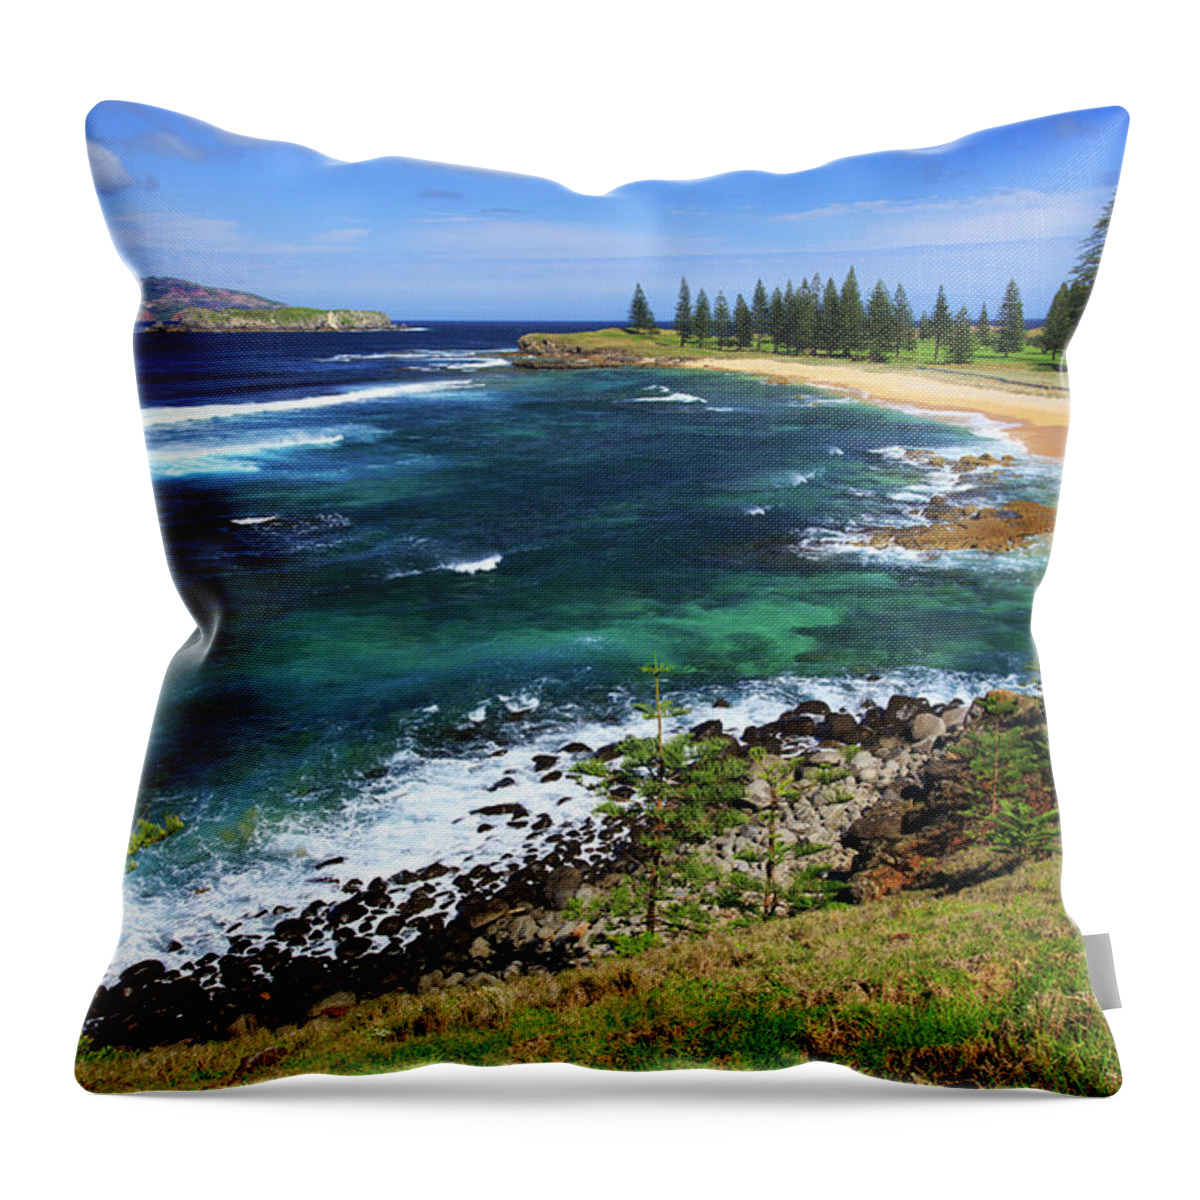 Scenics Throw Pillow featuring the photograph Norfolk Island by Steve Daggar Photography